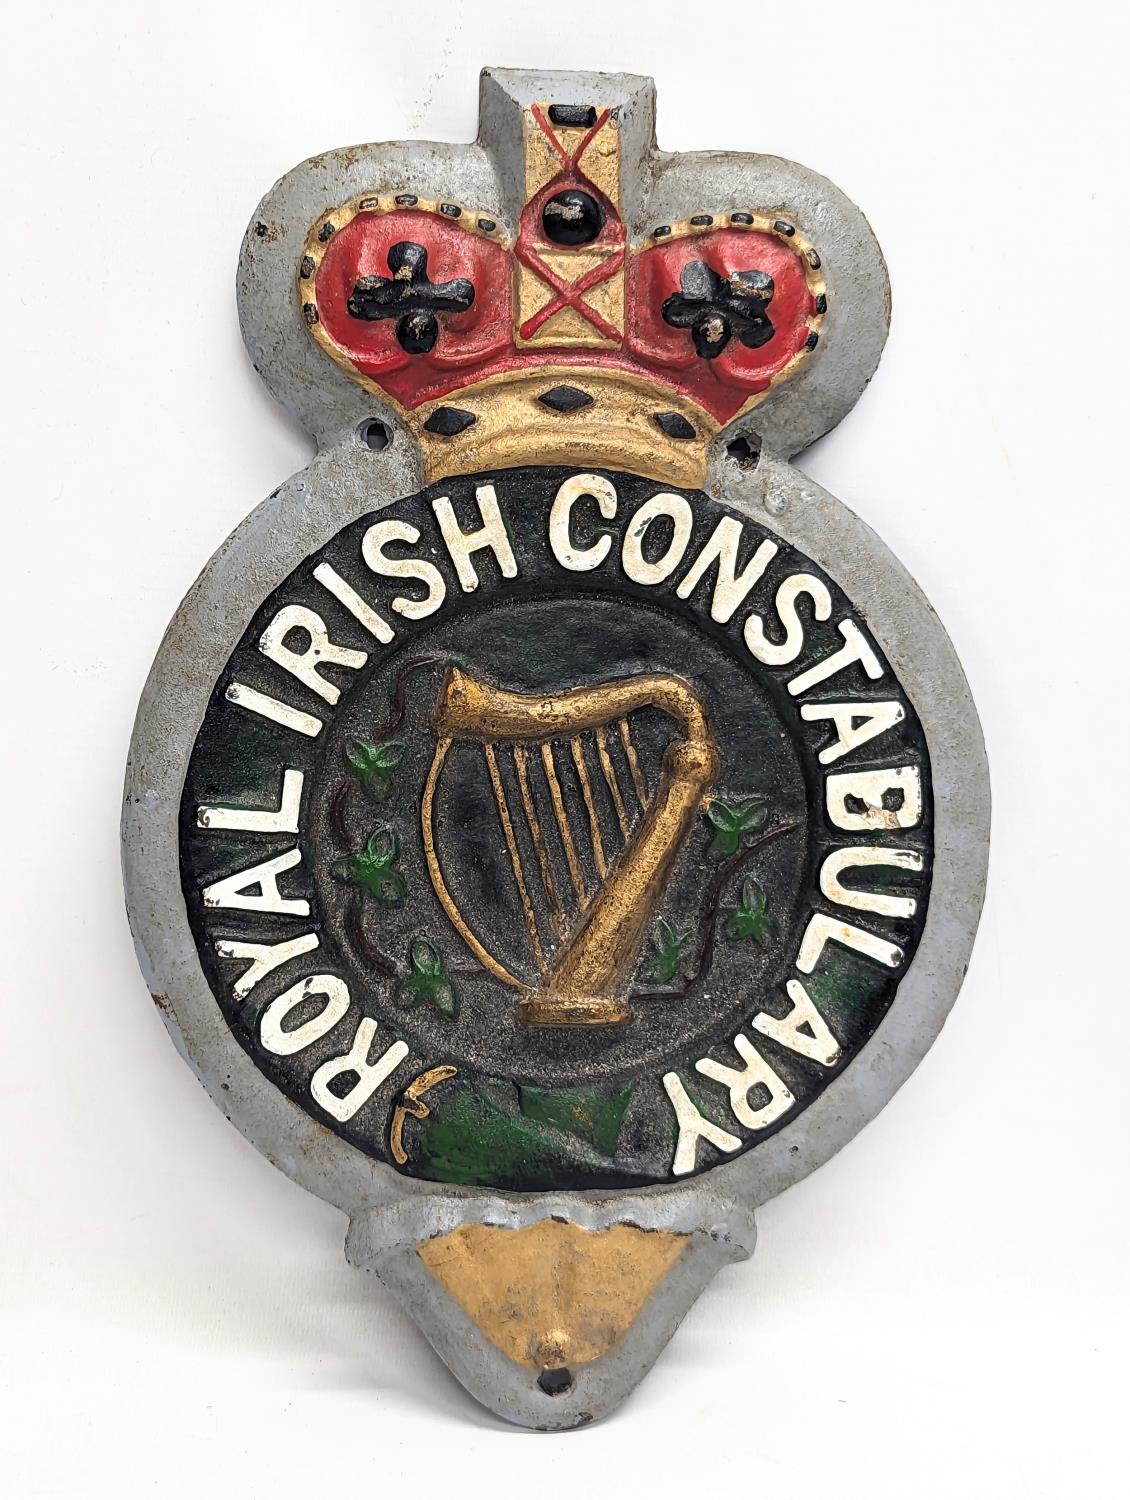 A cast iron plaque for The Royal Irish Constabulary. 26x40cm